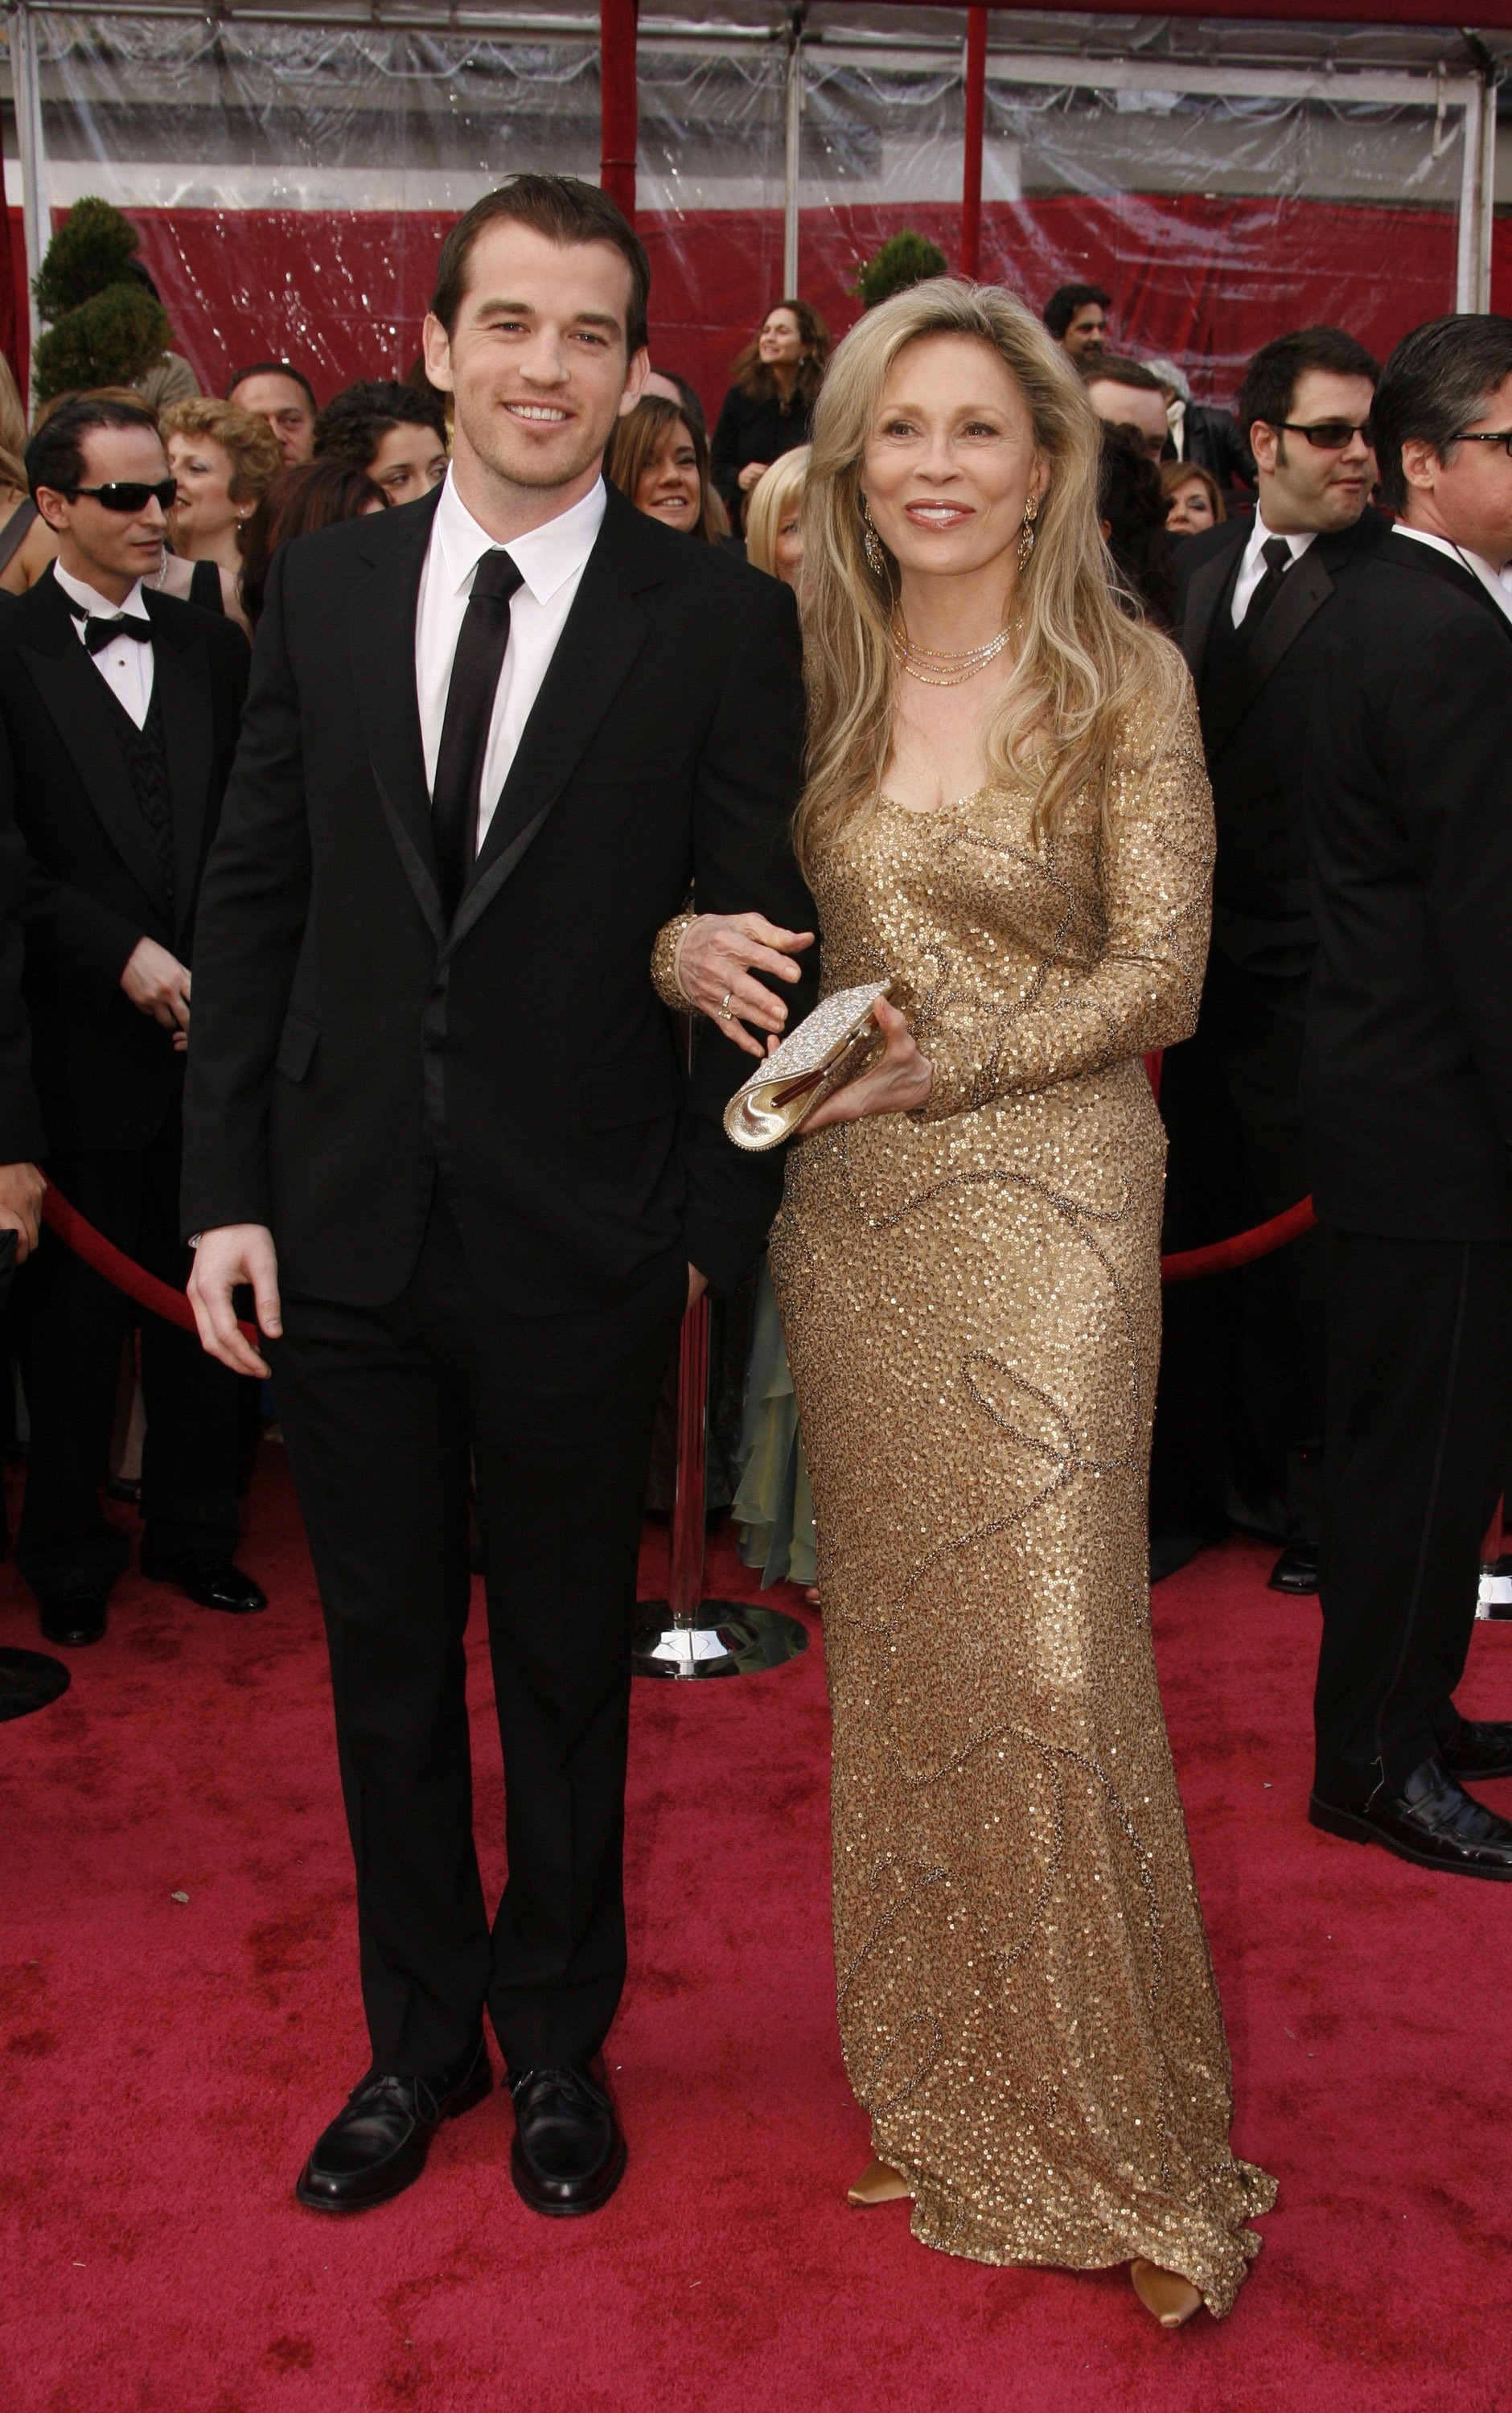 Faye Dunaway and her son Liam O'Neill arrive on the red carpet for The 80th Annual Academy Awards, 2008 in Hollywood, California. | Photo: Getty Images